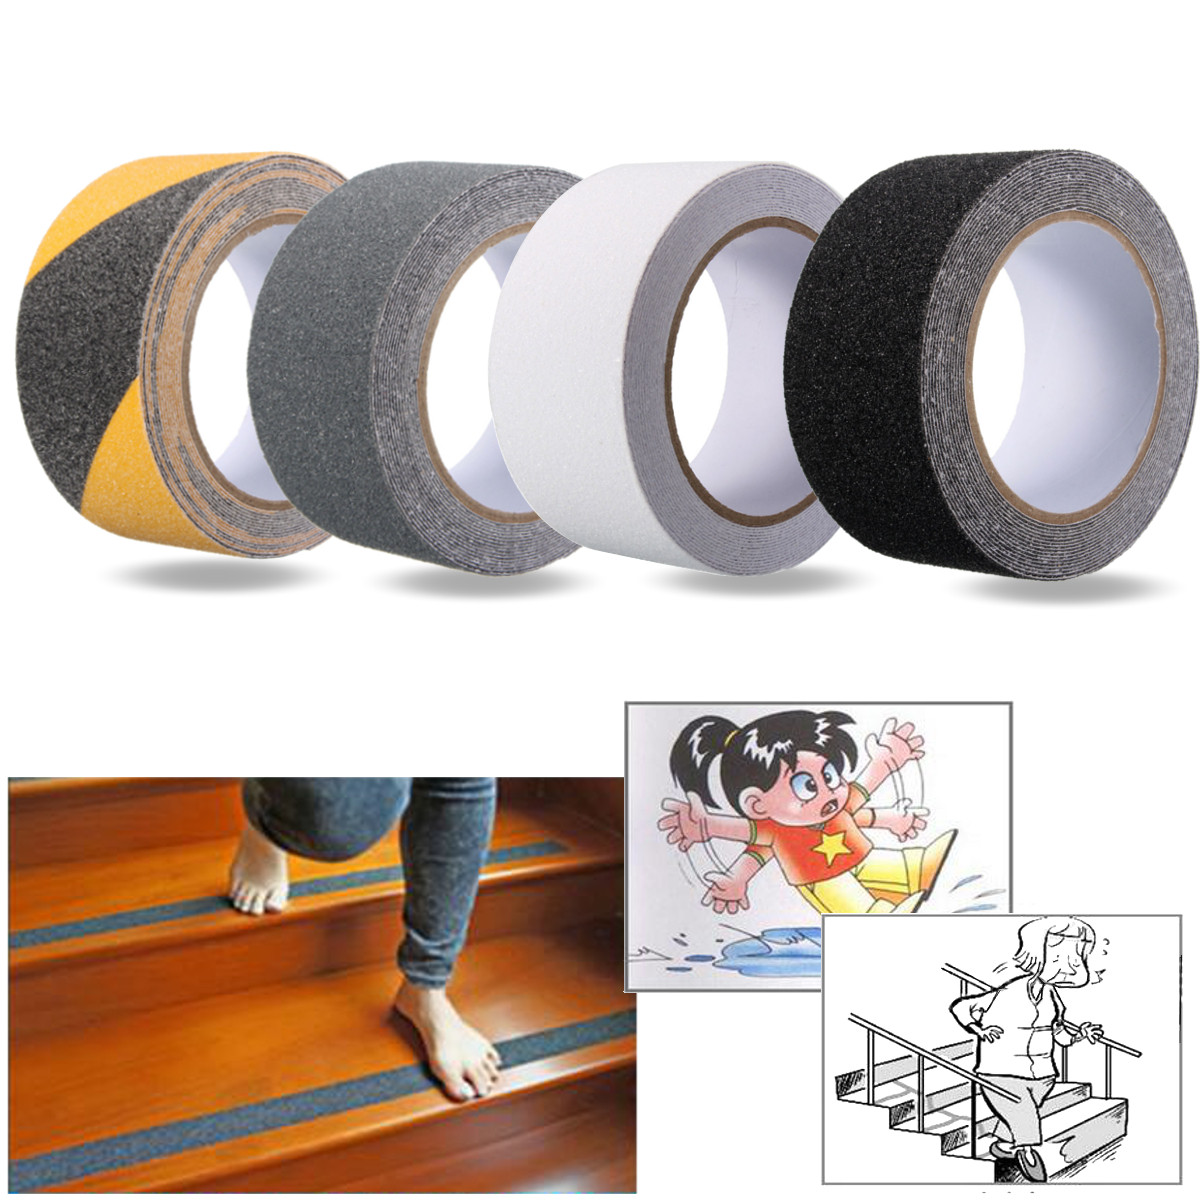 5CM-x-5M-Non-Slip-In-The-Dark-Tape-Anti-Slip-Adhesive-Grip-for-Stairs-and-Gaffers-165-Feet-Long-1382967-2